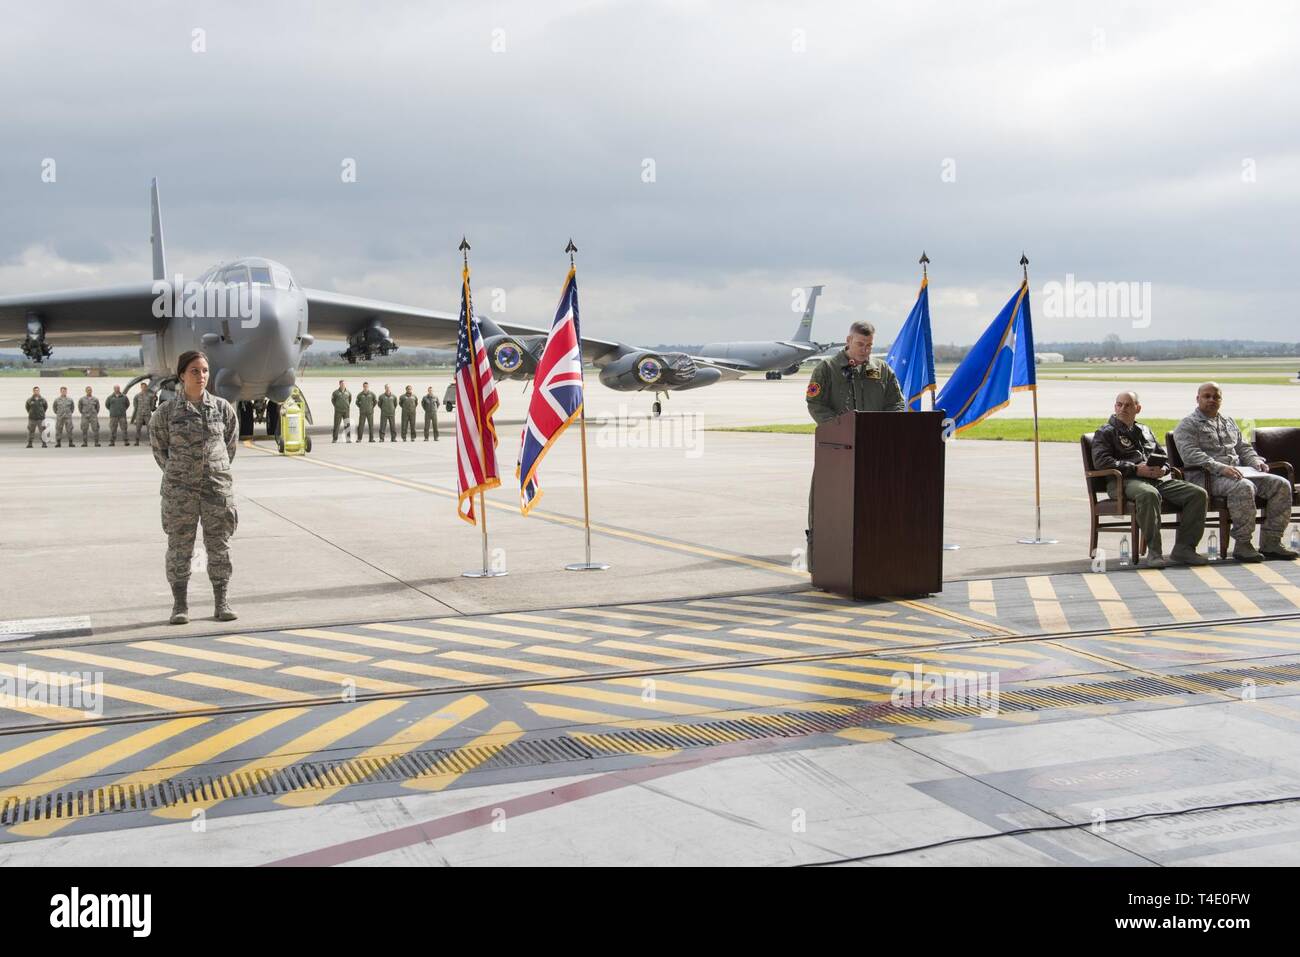 U.S. Air Force Lt. Col. Mike Esposito, Bomber Task Force in Europe commander, speaks during a press conference at RAF Fairford, March 19, 2019, regarding a Bomber Task Force Europe deployment. The contingent of B-52 aircraft, Airmen and support equipment are currently deployed from the 2nd Bomb Wing, Barksdale Air Force Base, La., to support the BTF. The deployment of strategic bombers to the U.K. helps exercise RAF Fairford as U.S. Air Forces in Europe - Air Forces Africa’s forward-operating location for bombers. The deployment includes joint and allied training to enhance interoperability an Stock Photo